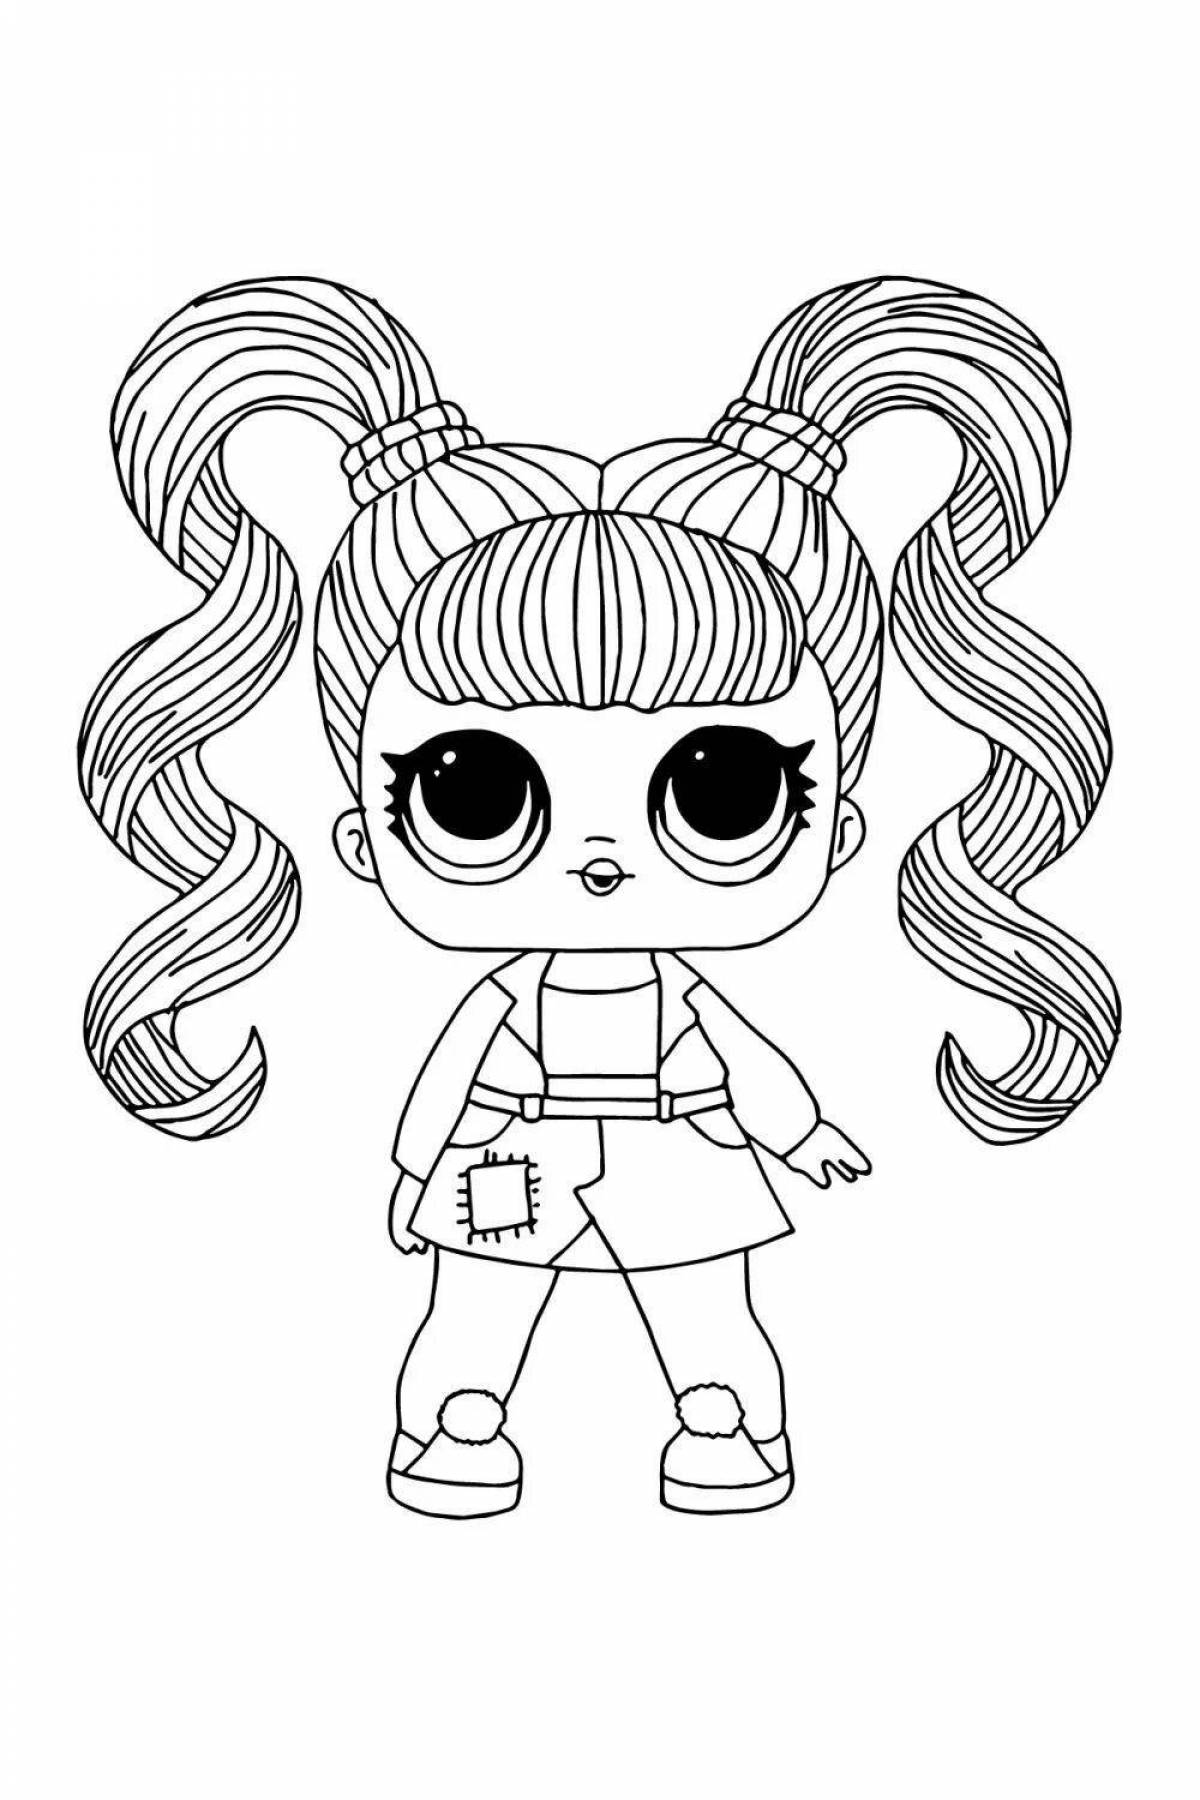 Glamour lol doll coloring book